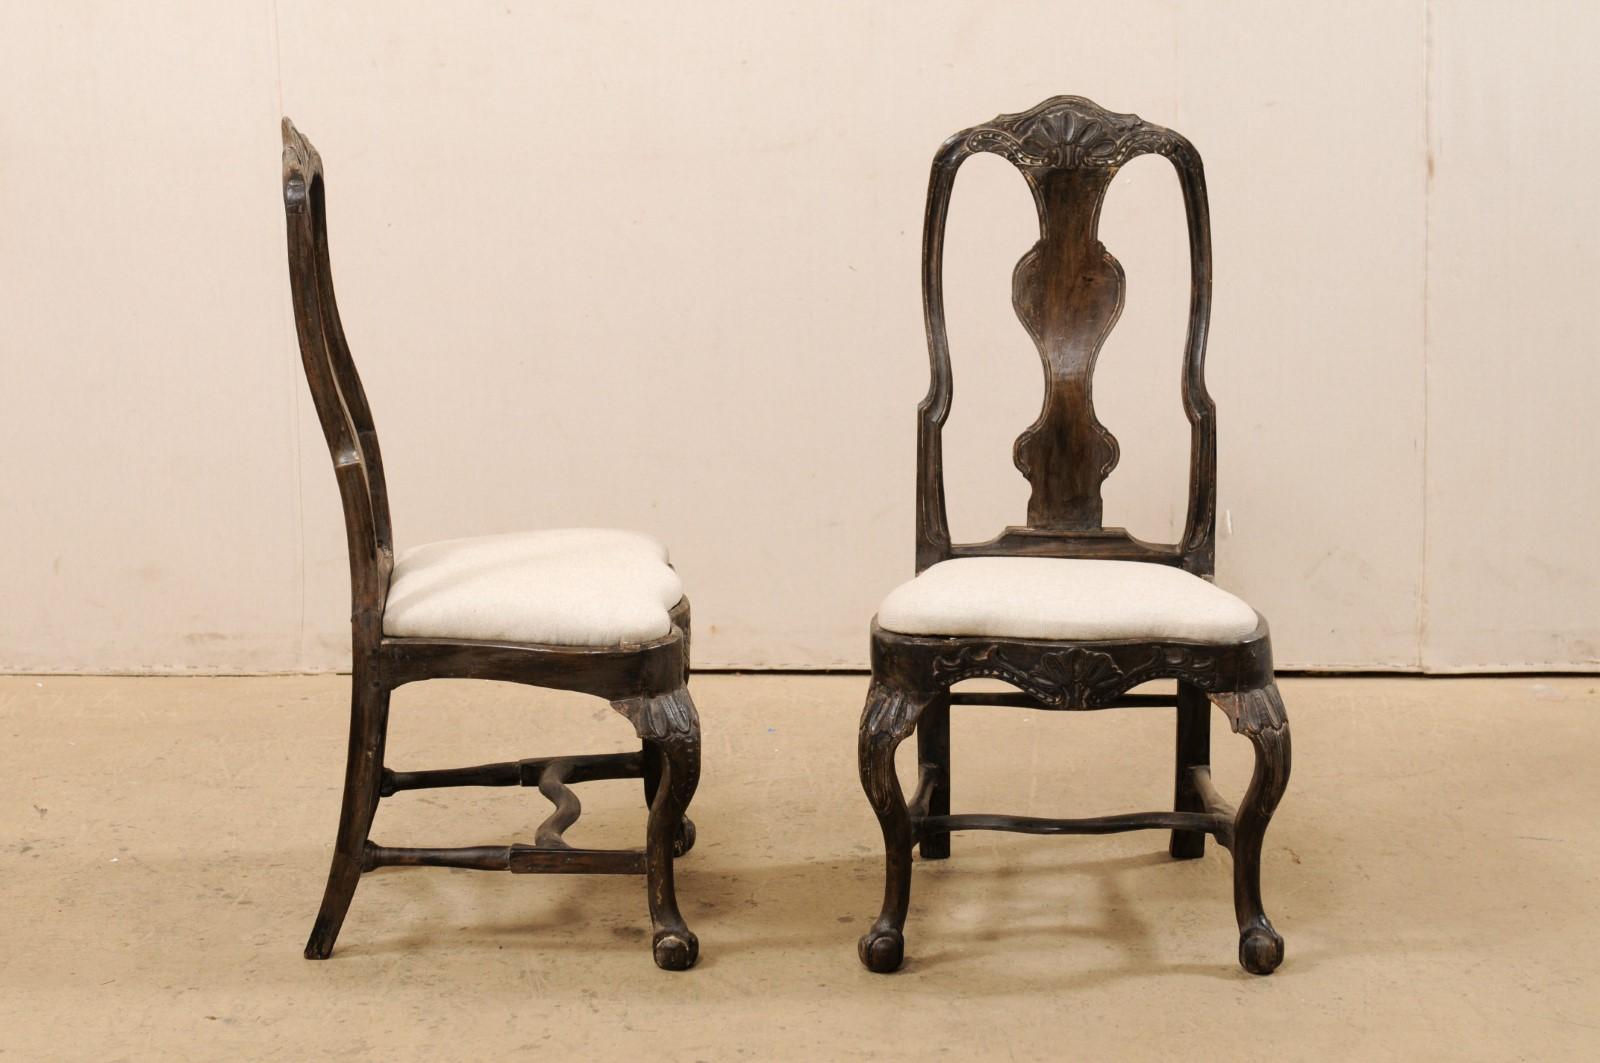 Upholstery Pair of Swedish Period Rococo Carved-Wood Side Chairs, 18th Century For Sale